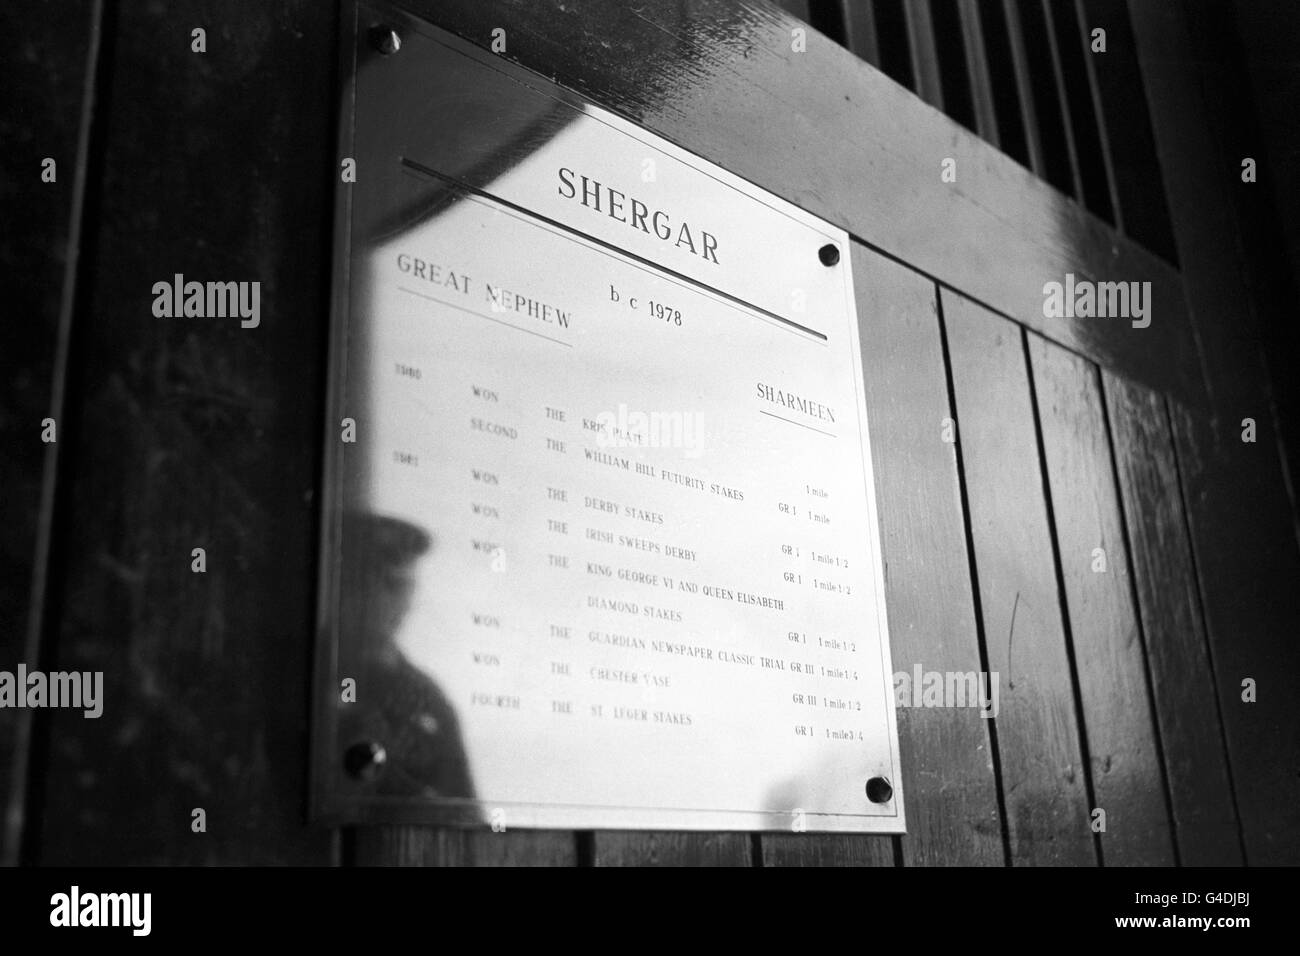 Image of the name plate Shergar's stable box where was taken from on Tuesday 8th February at the stud farm in Ballymany, County Kildare, Republic of Ireland. Shergar was never found and no one had been charged with the theft. Stock Photo